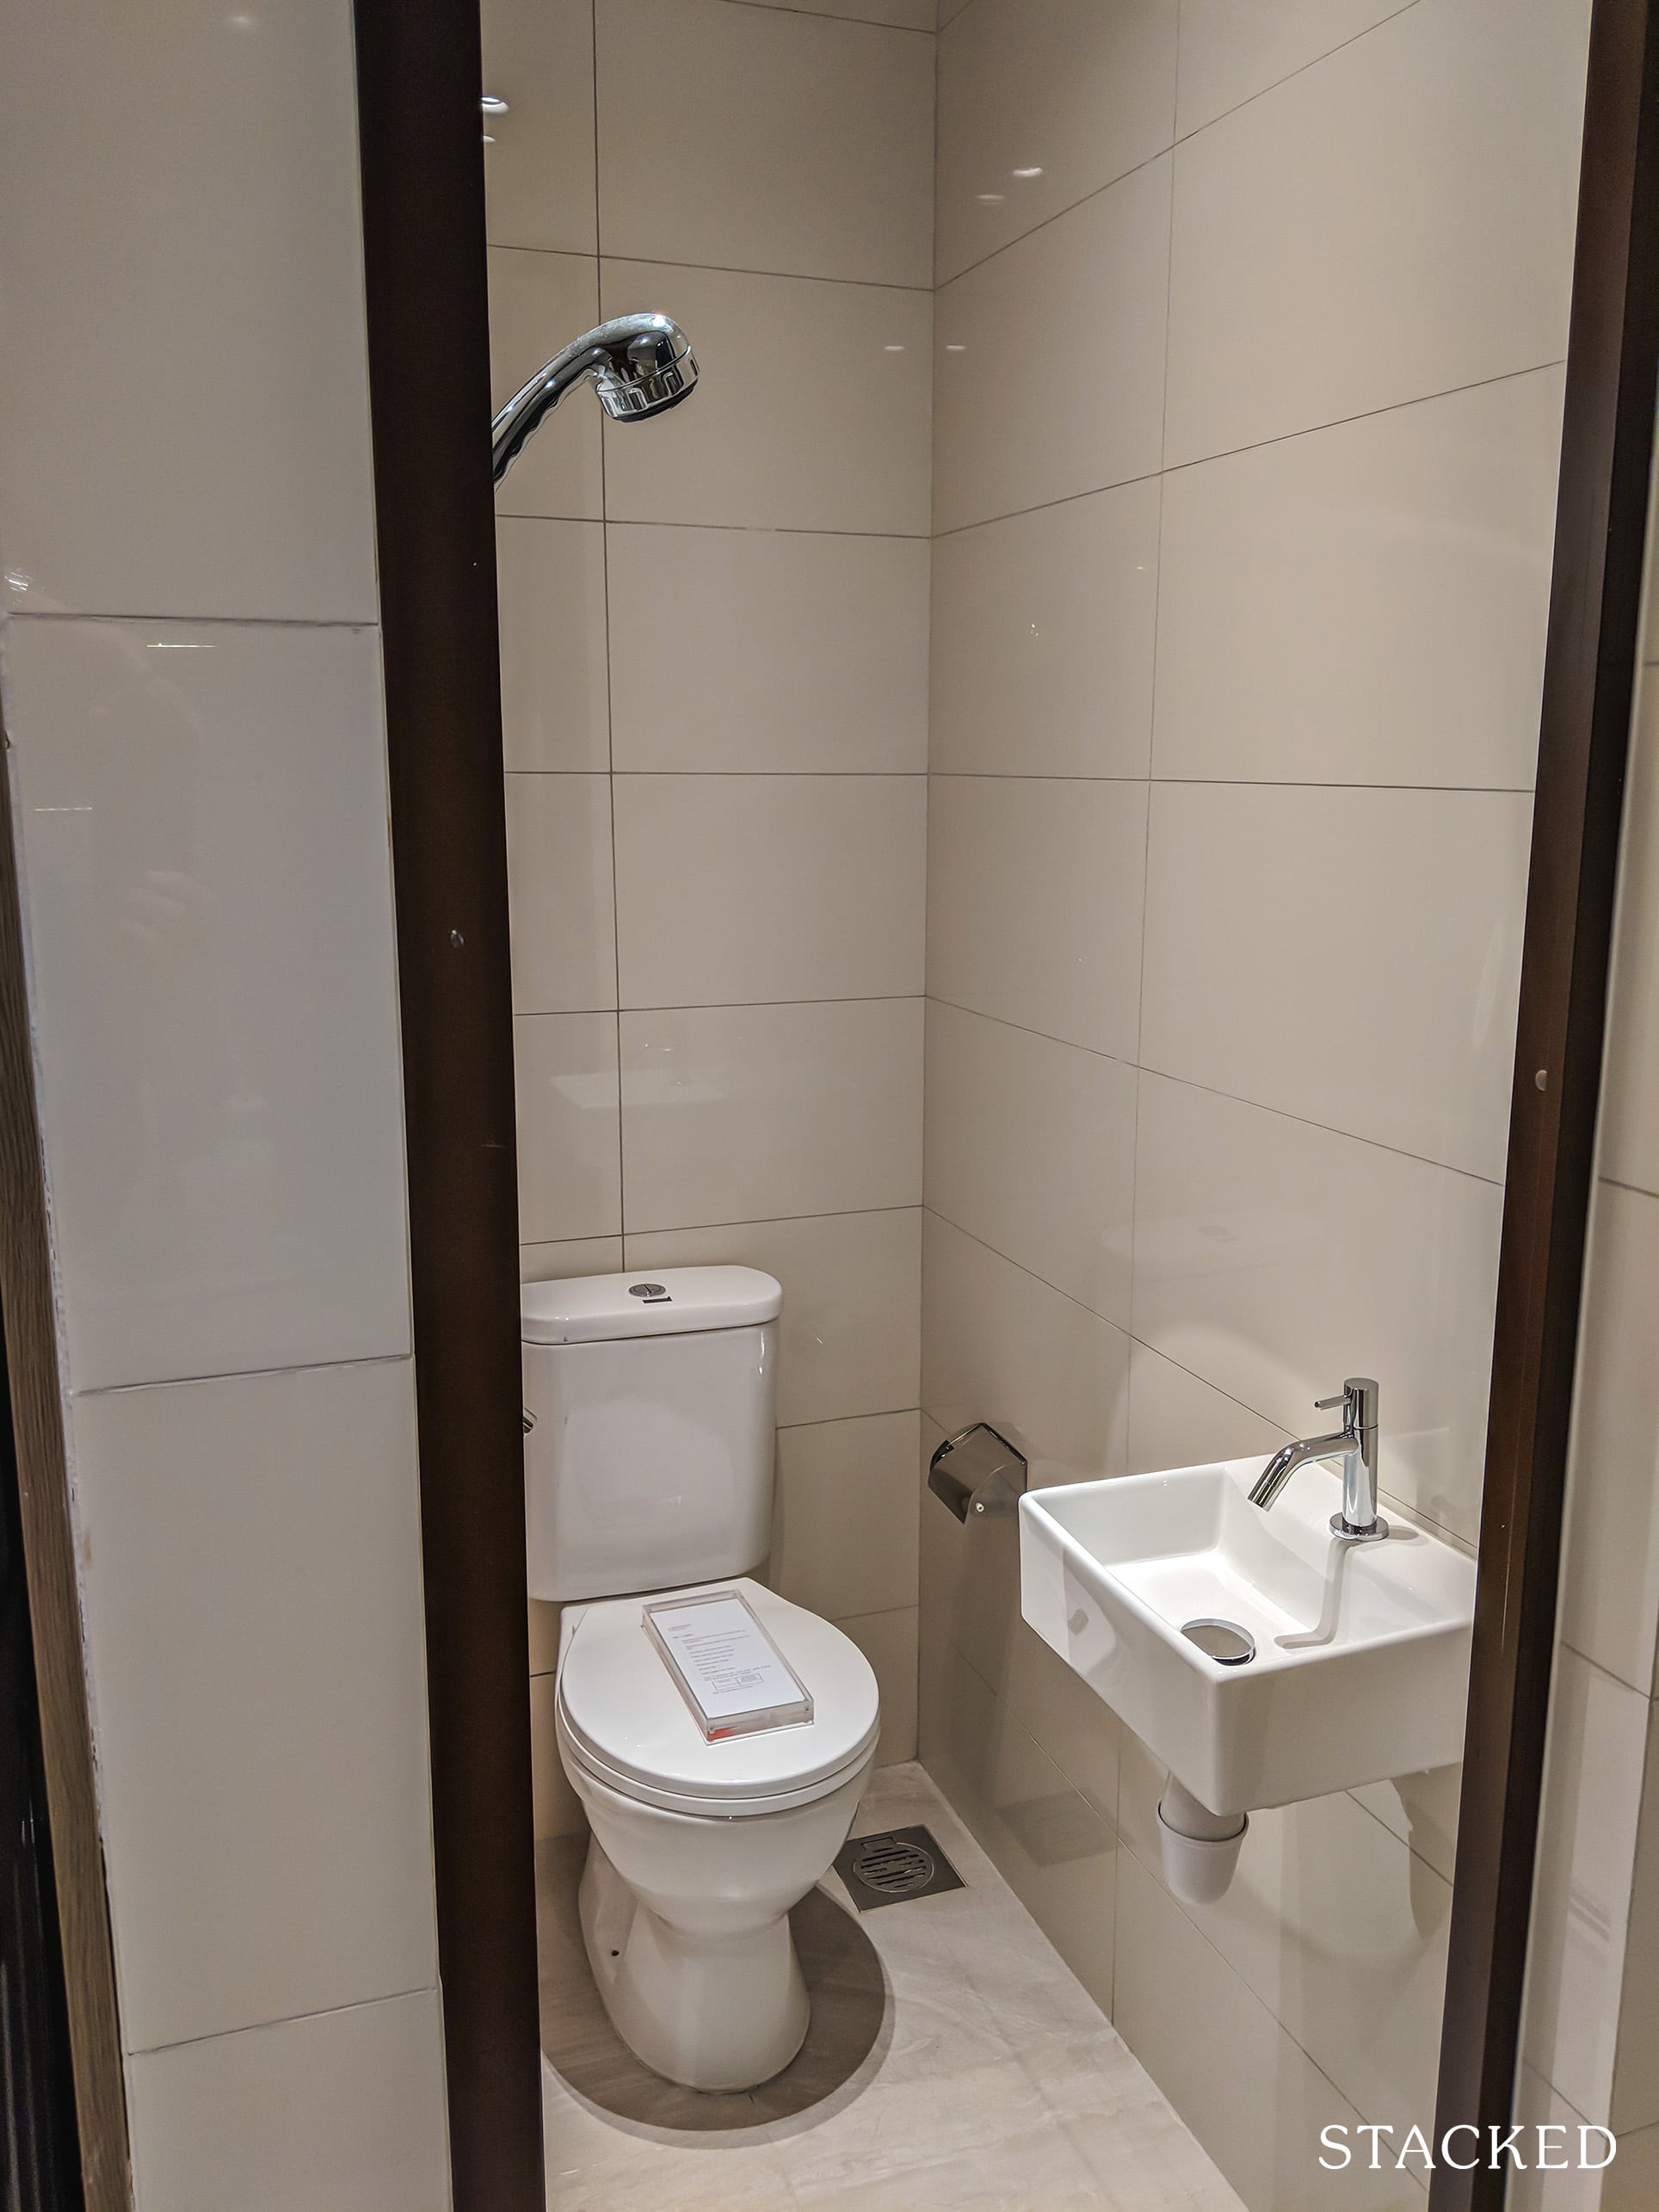 Avenue South Residence 3 bedroom toilet